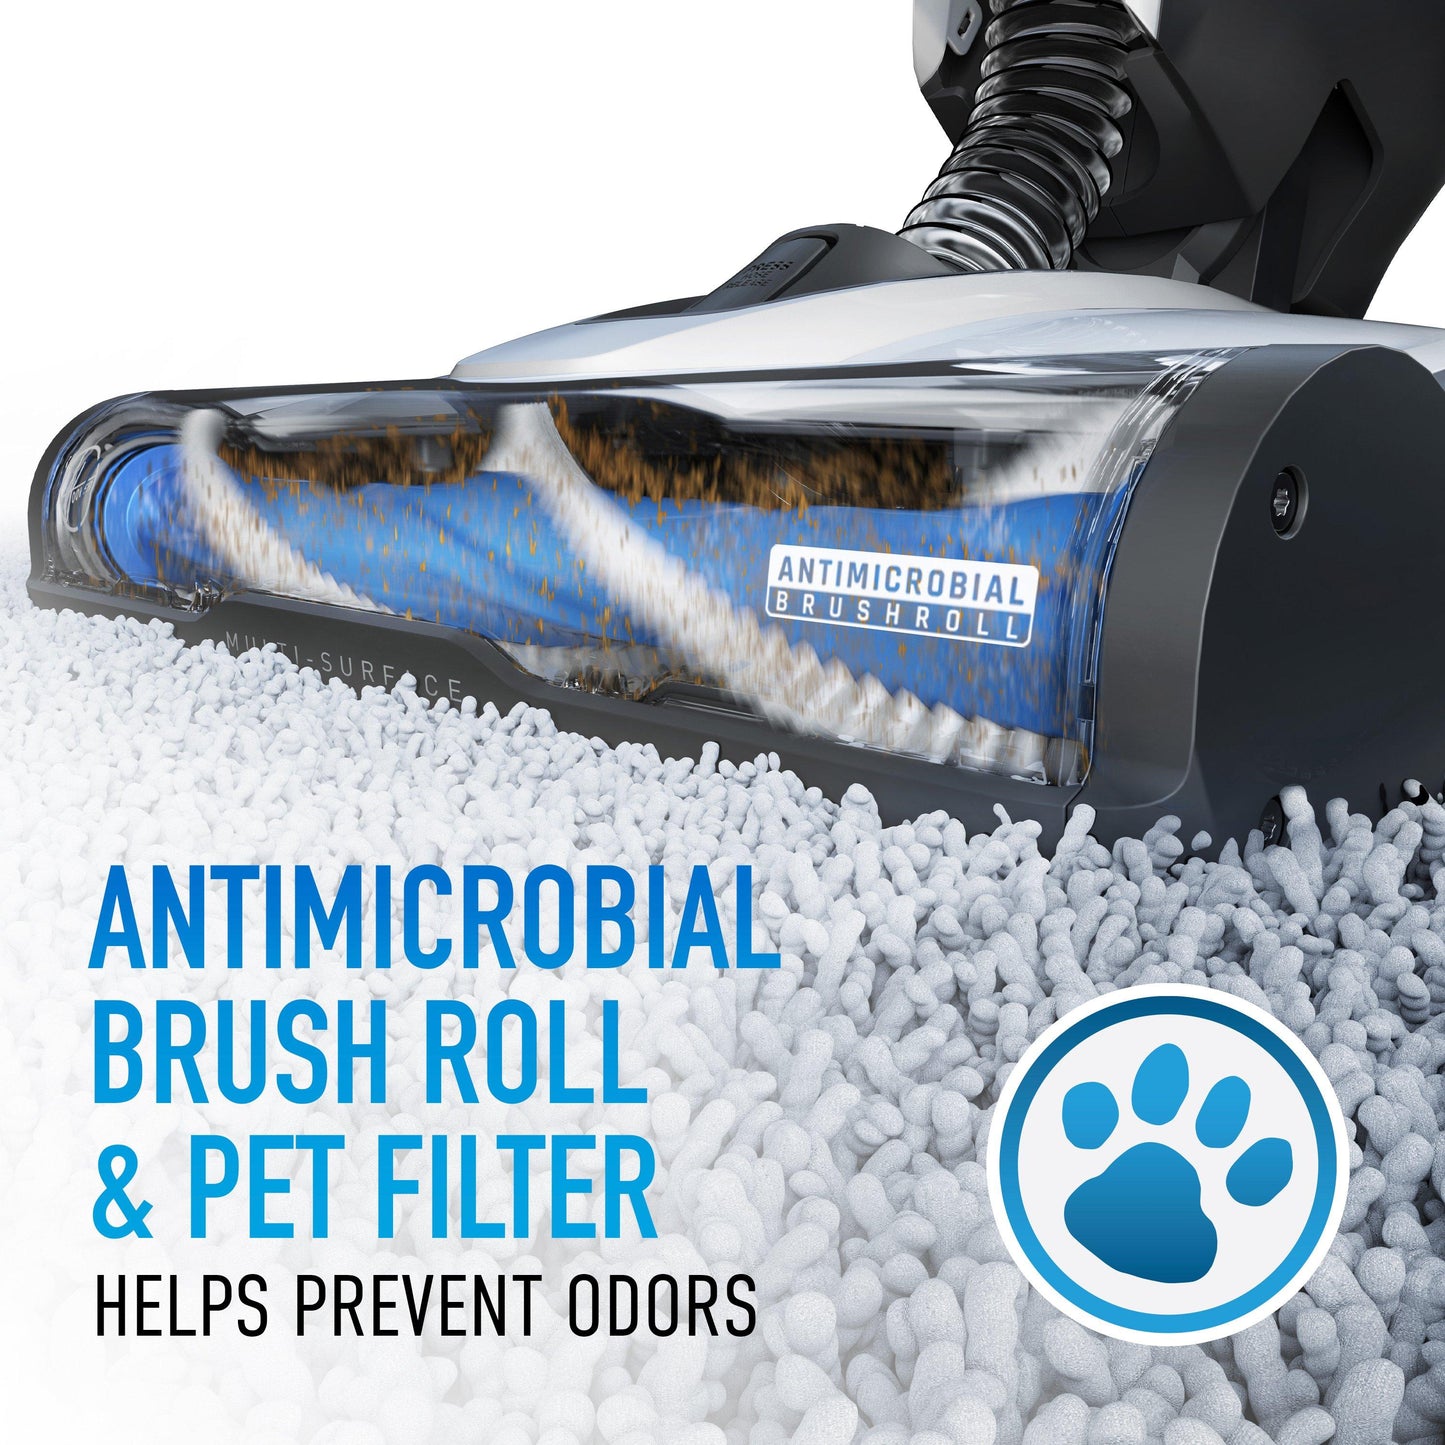 The brush roll of the Evolve Pet is antimicrobial with a pet filter that helps prevent odors